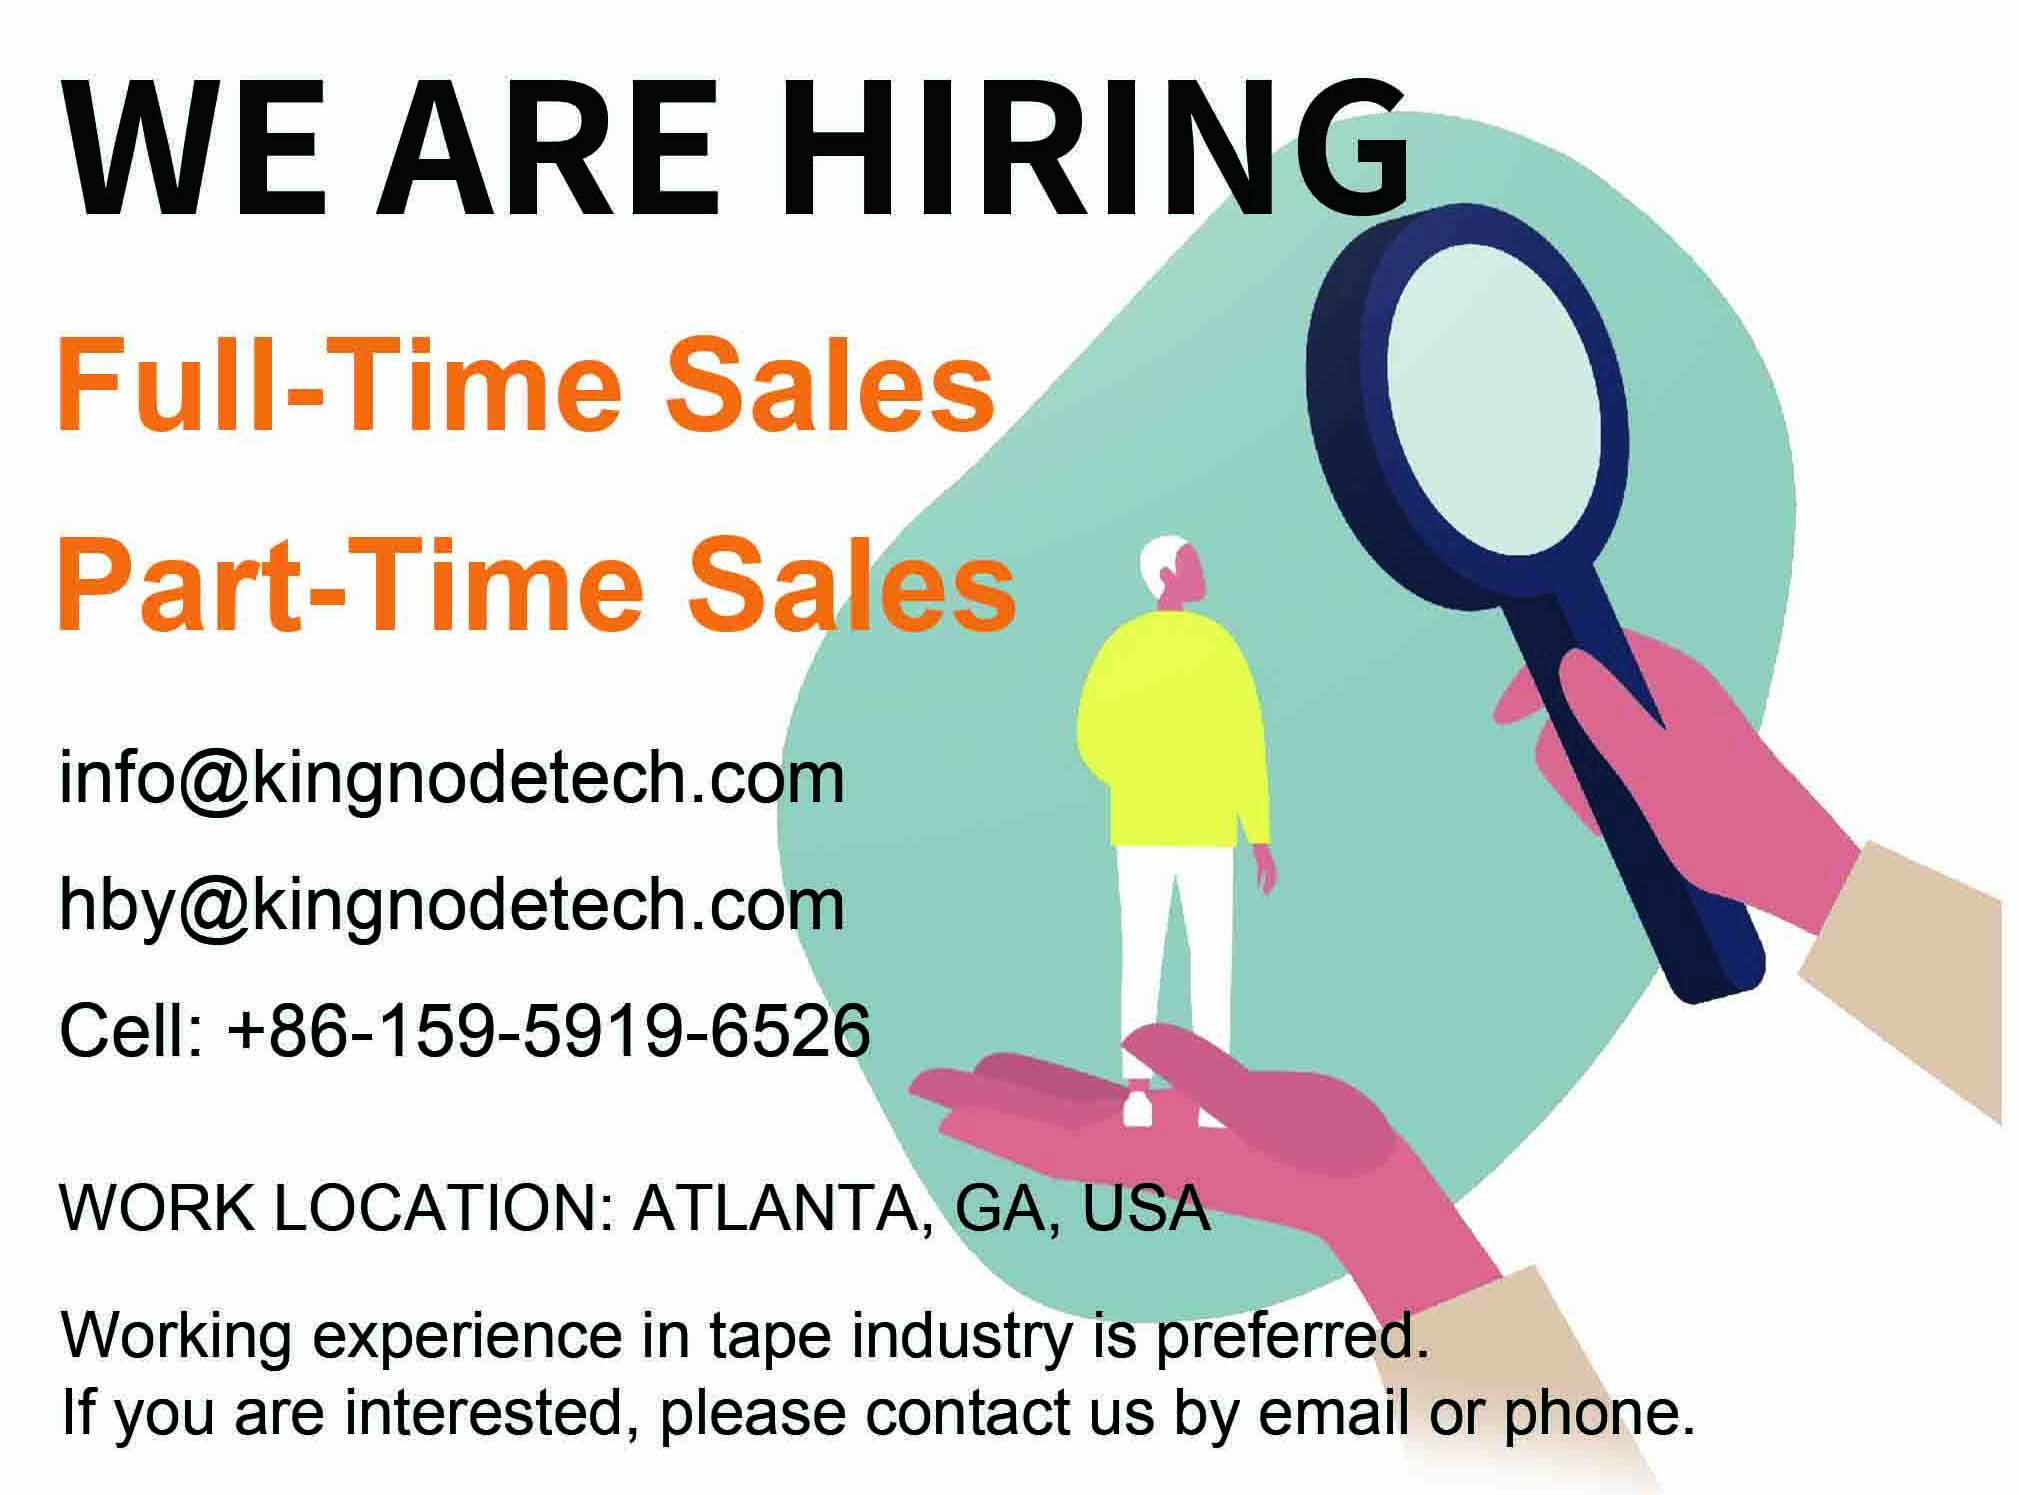 We Are Hiring Sales in GA, USA